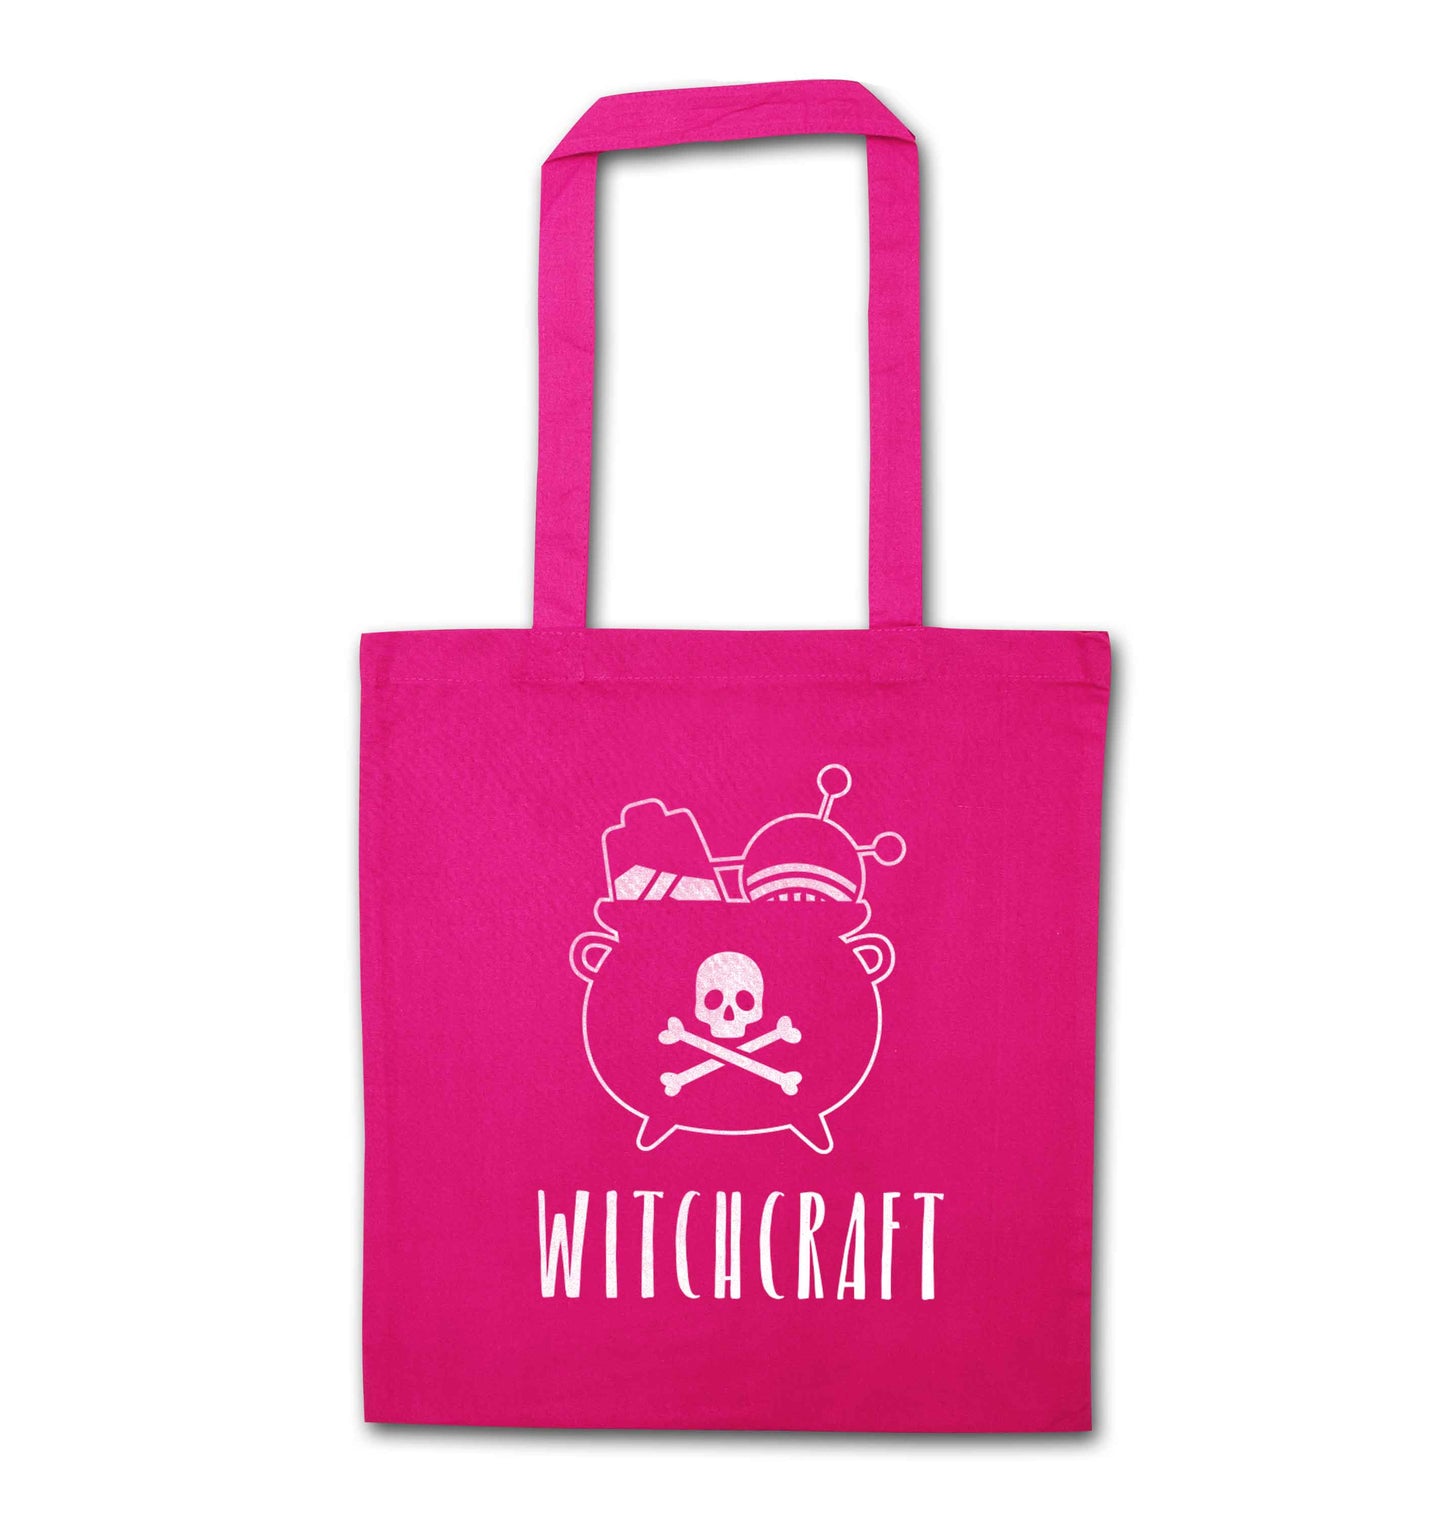 Witchcraft pink tote bag